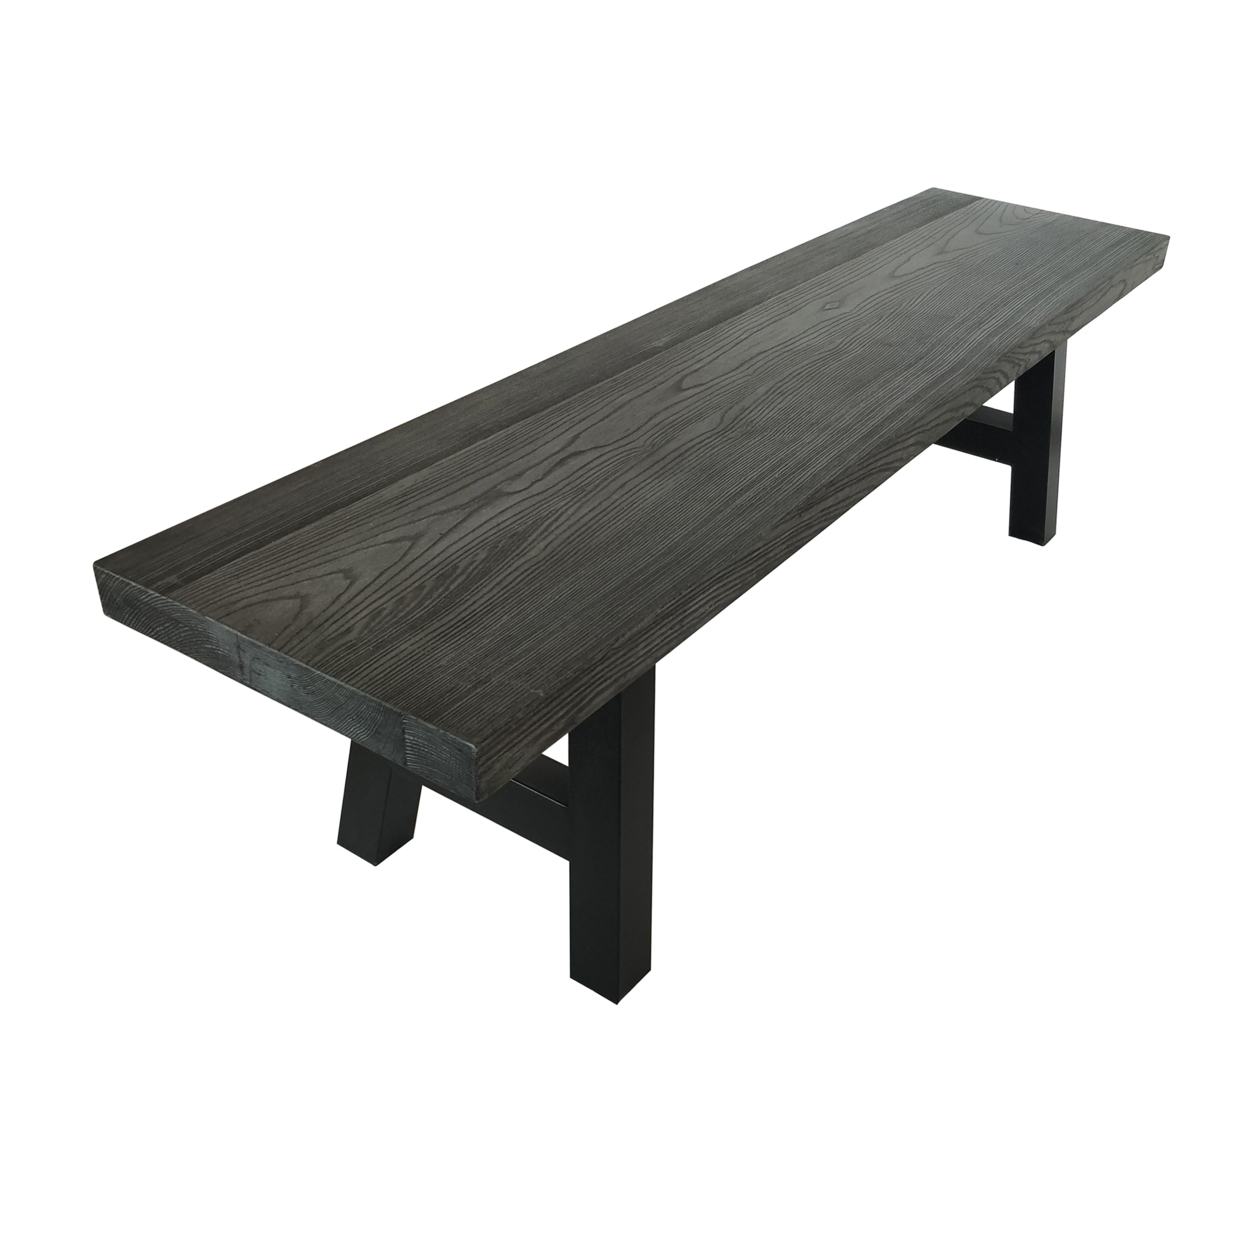 Edward Indoor Light Weight Concrete Dining Bench - Natural Gray